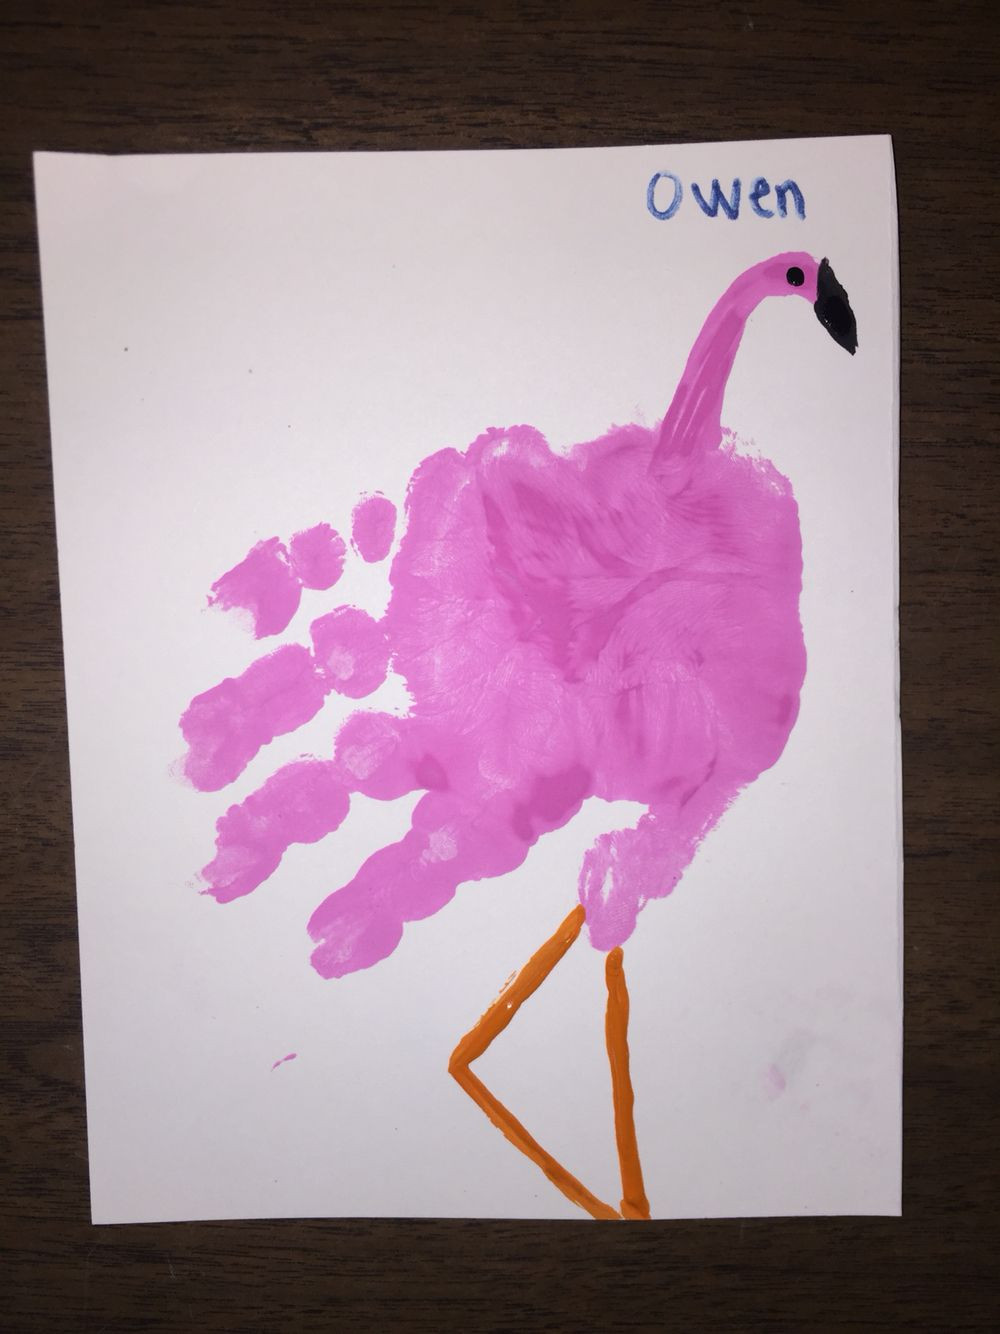 Arts &amp; Crafts For Toddlers
 Handprint flamingo arts and crafts for toddlers